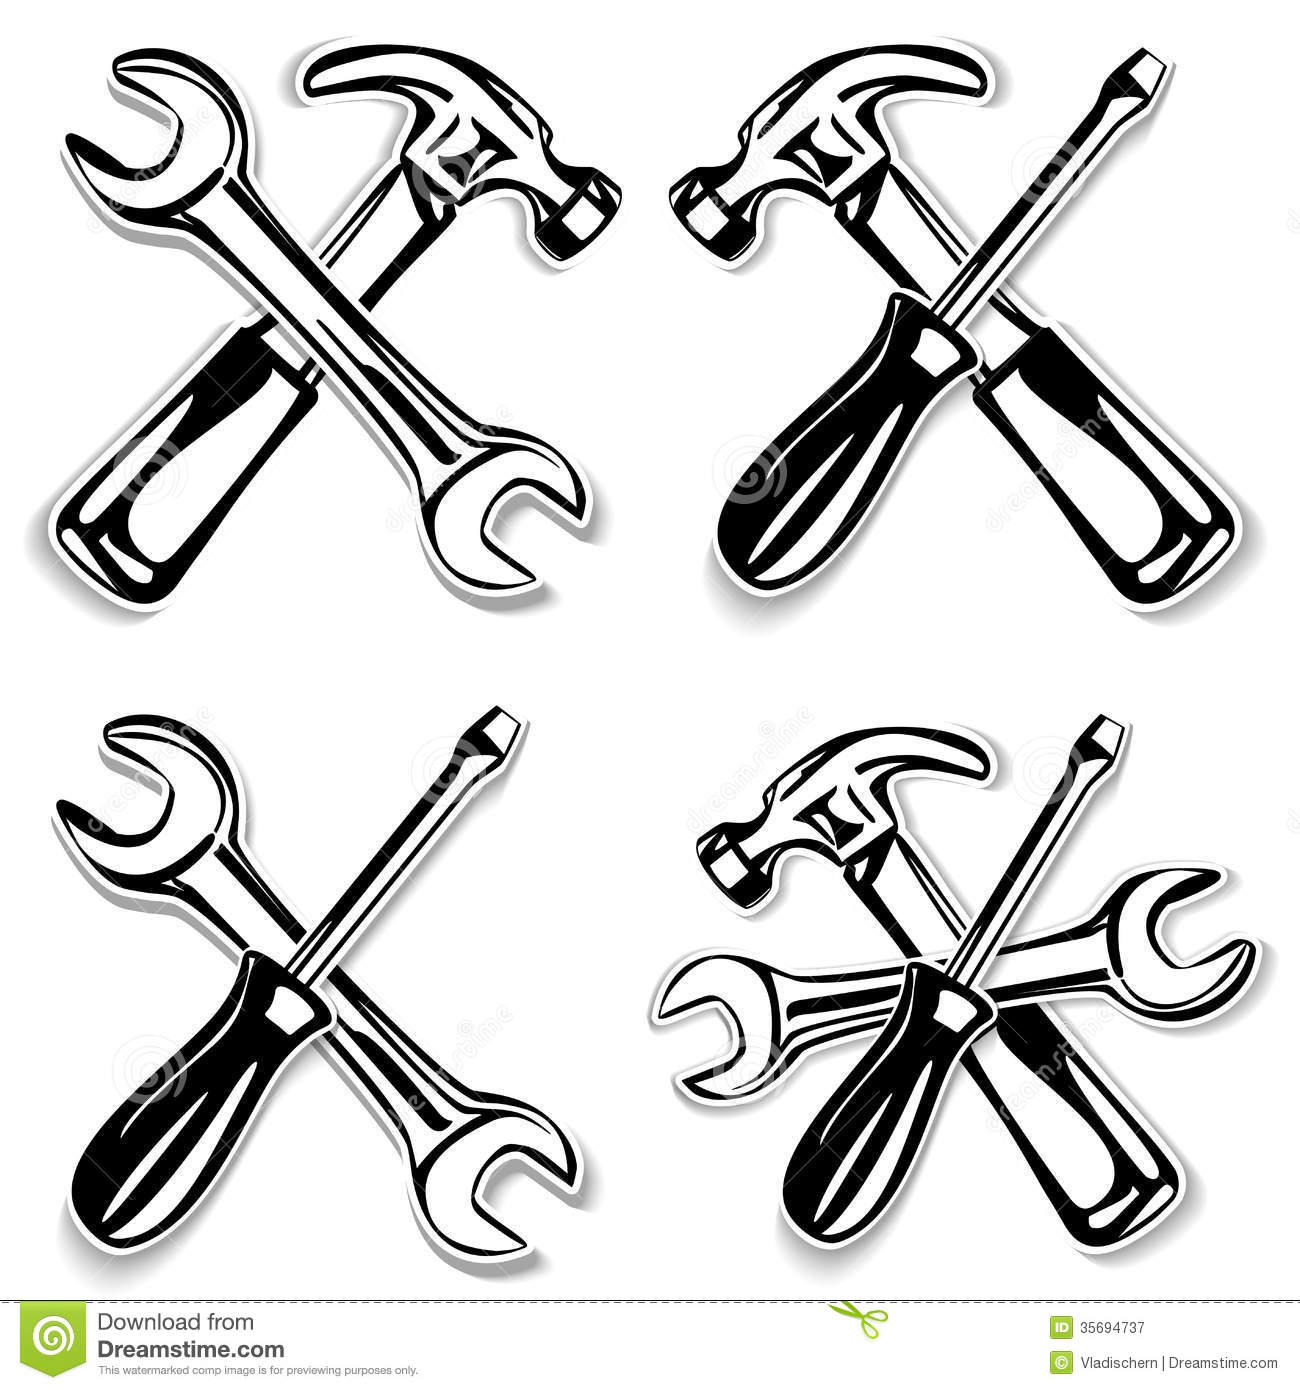     Free Stock Photography  Hammer And Screwdriver And Wrench Set Icon